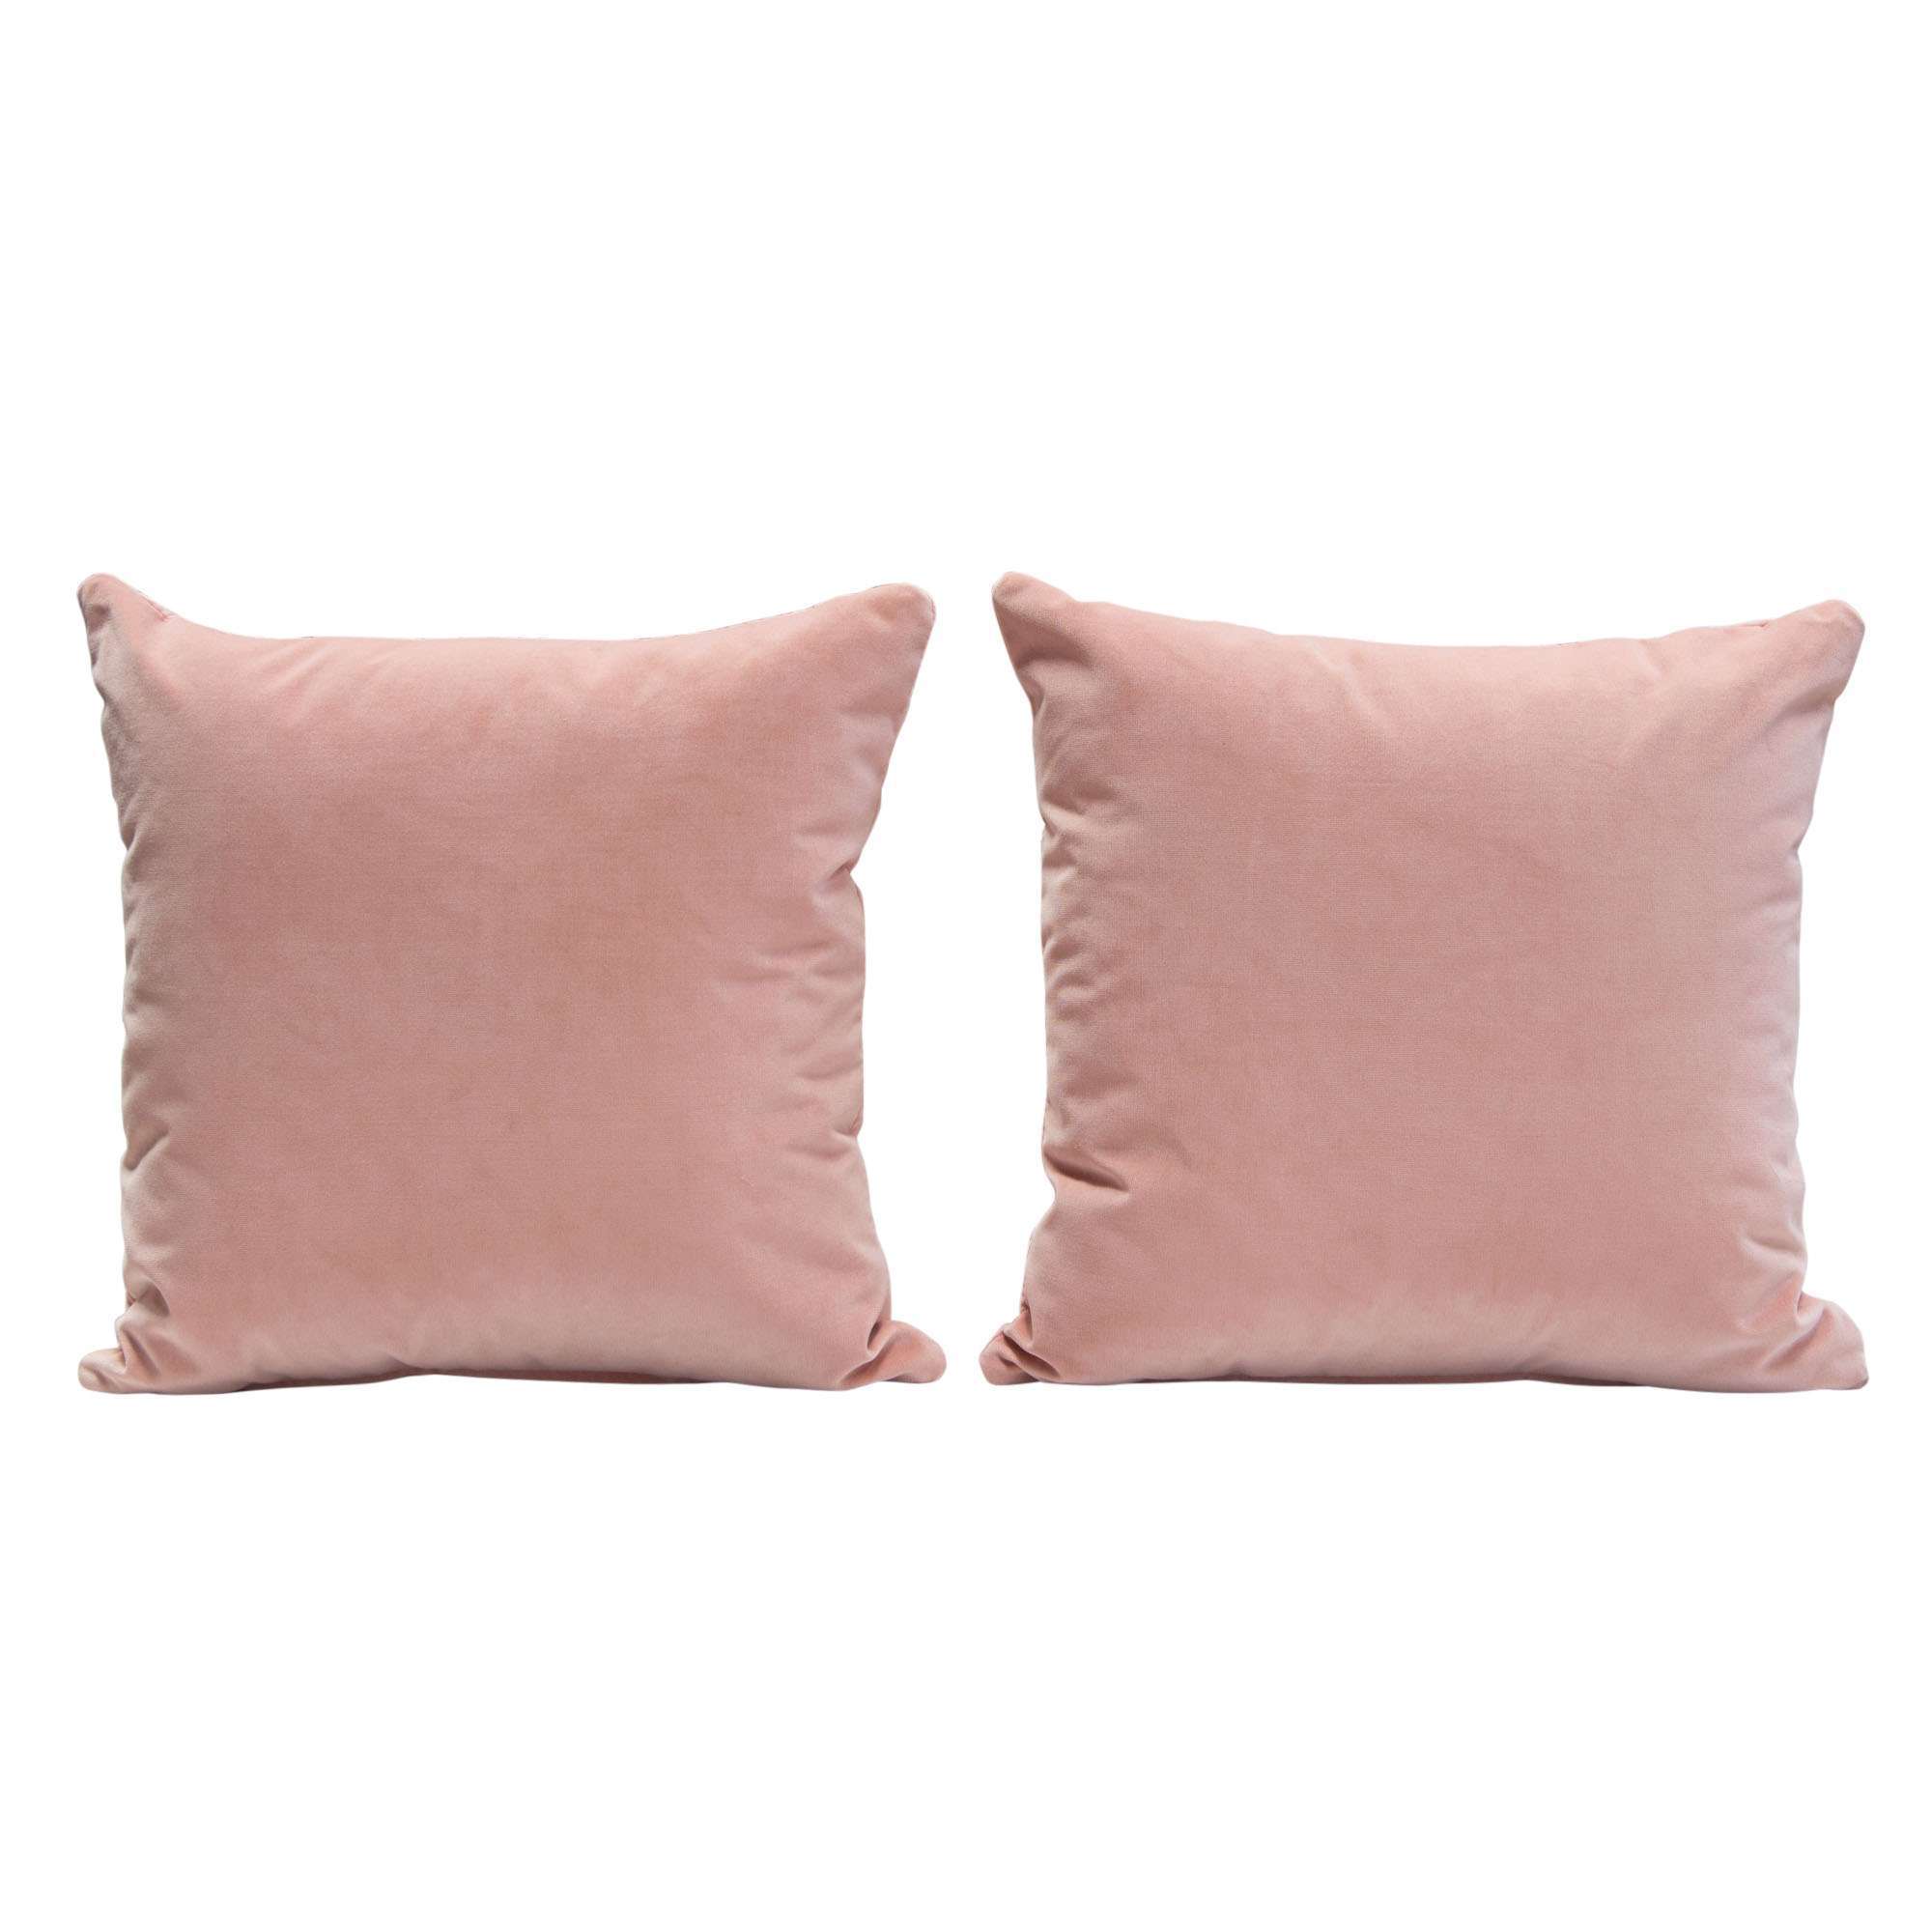 Set of (2) 16" Square Accent Pillows in Blush Pink Velvet by Diamond Sofa - Decorian Group